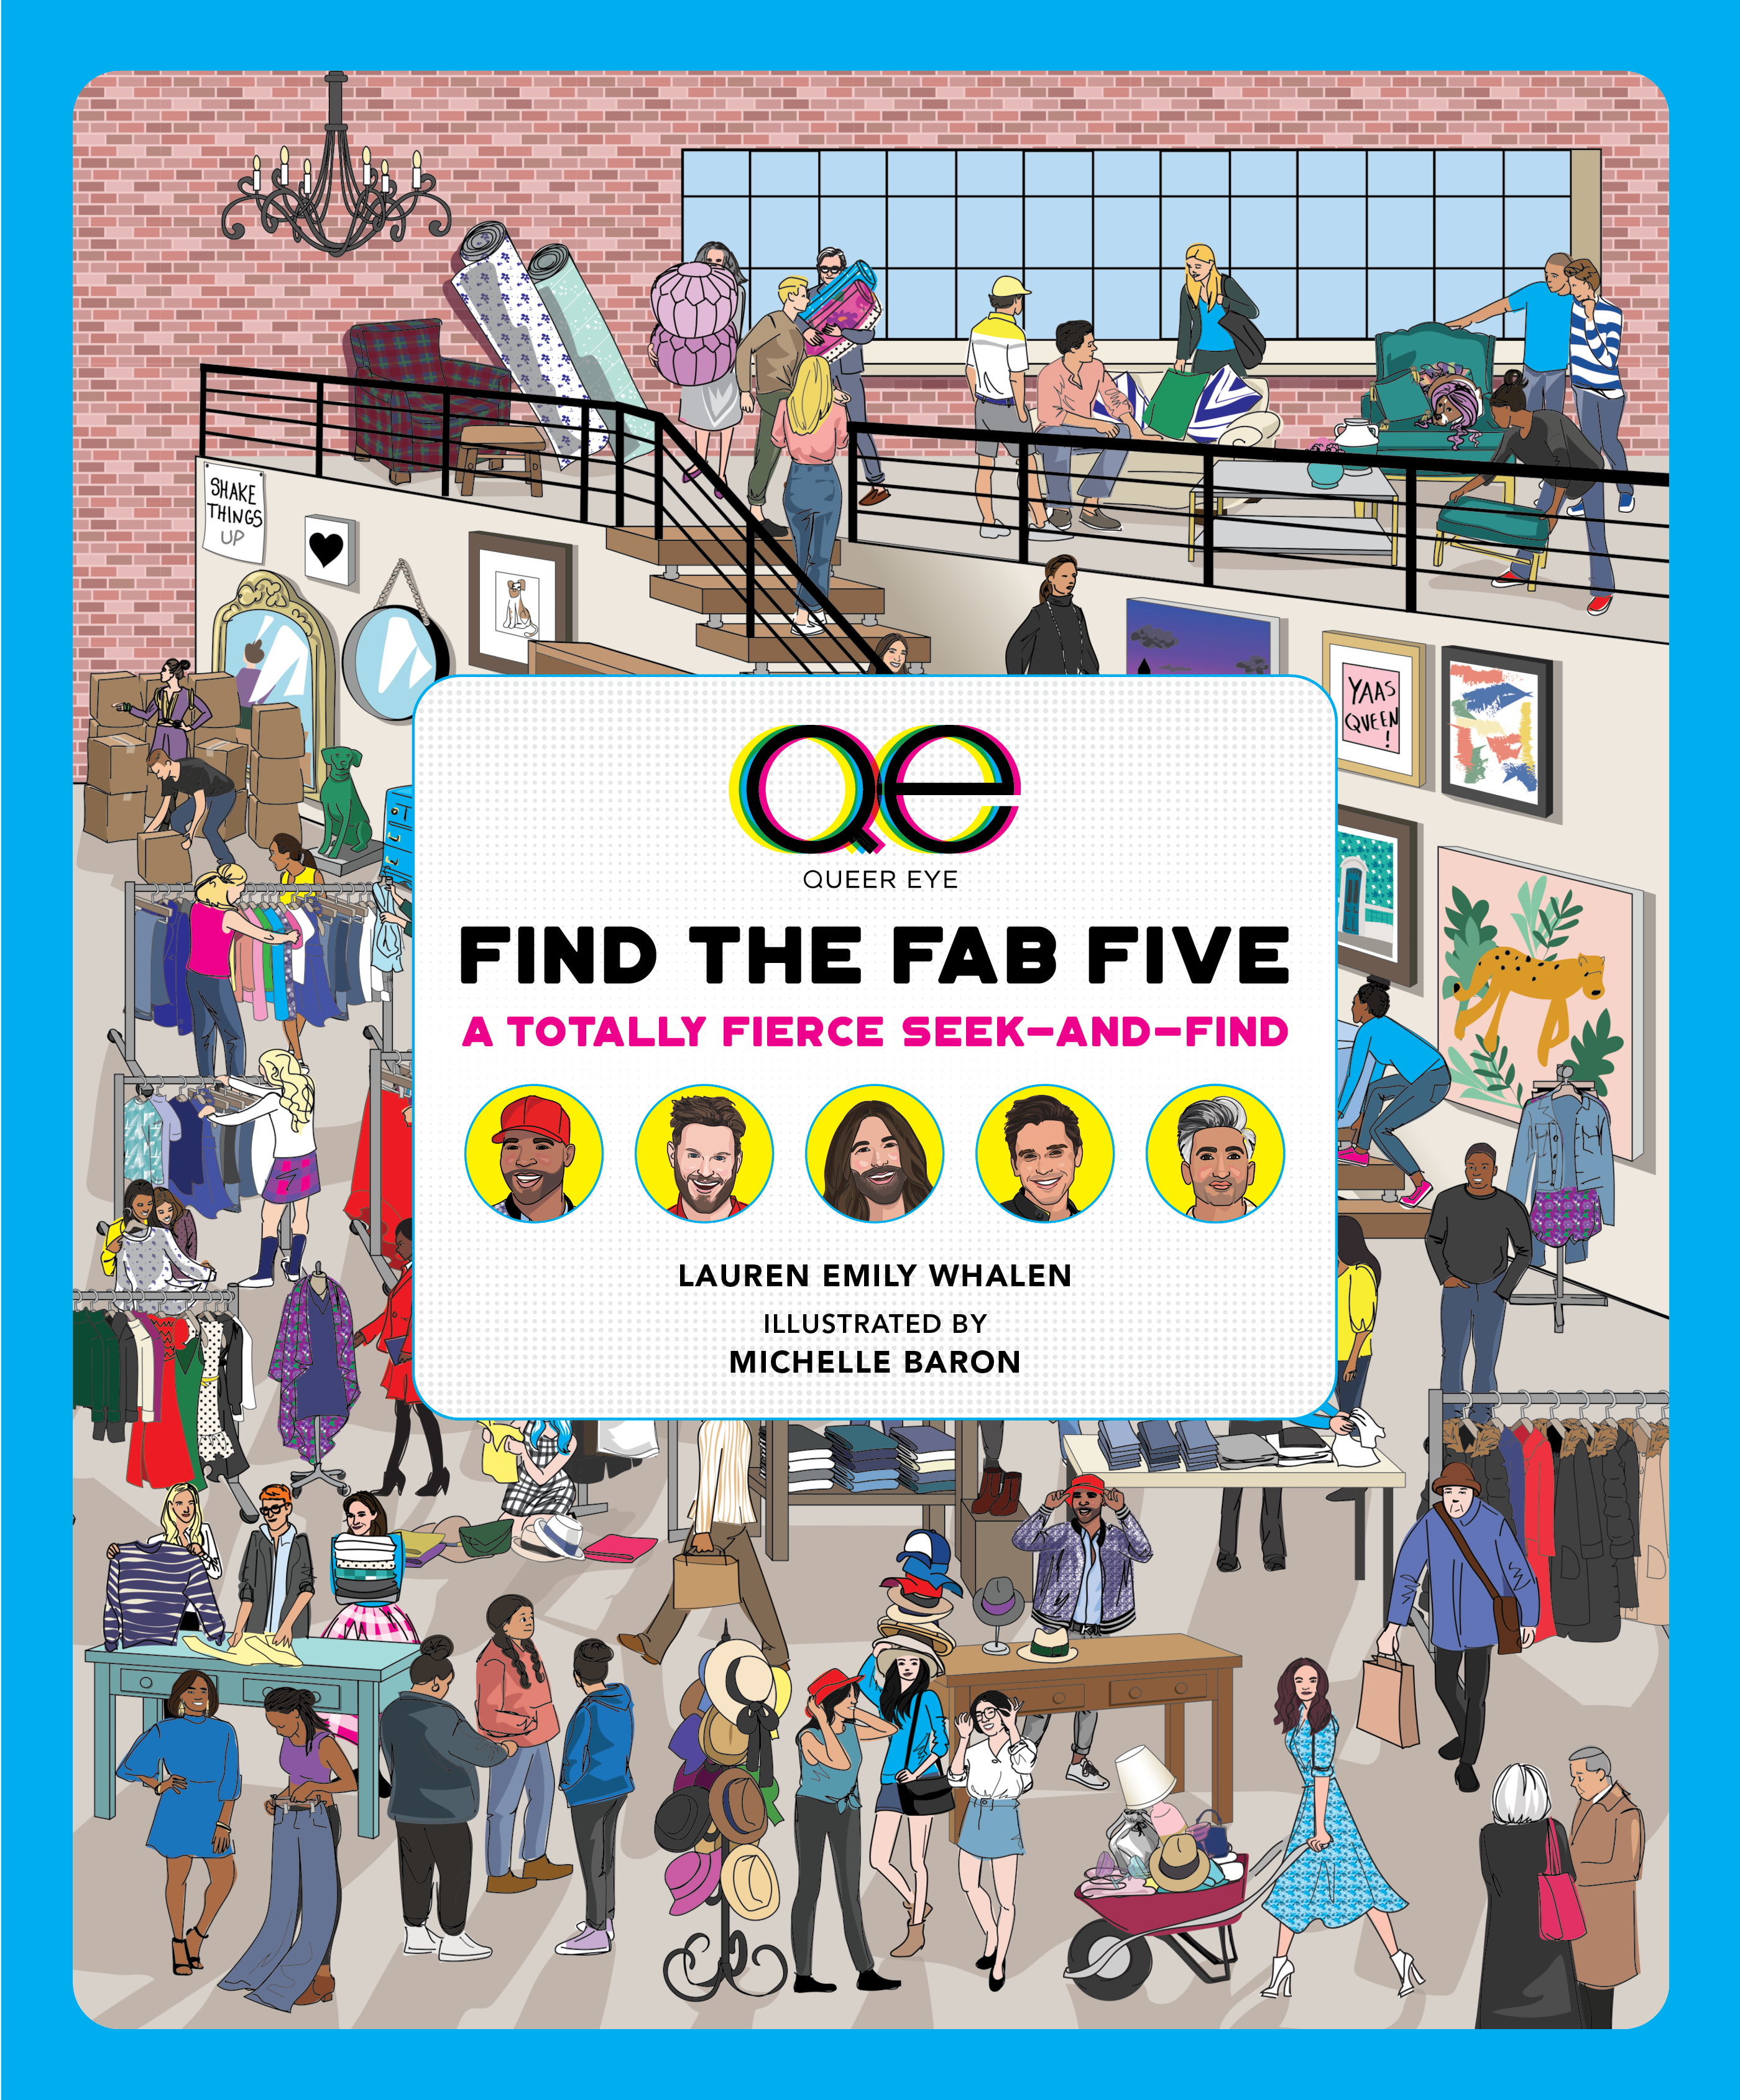 Queer Eye: Find the Fab Five by Lauren Emily Whalen